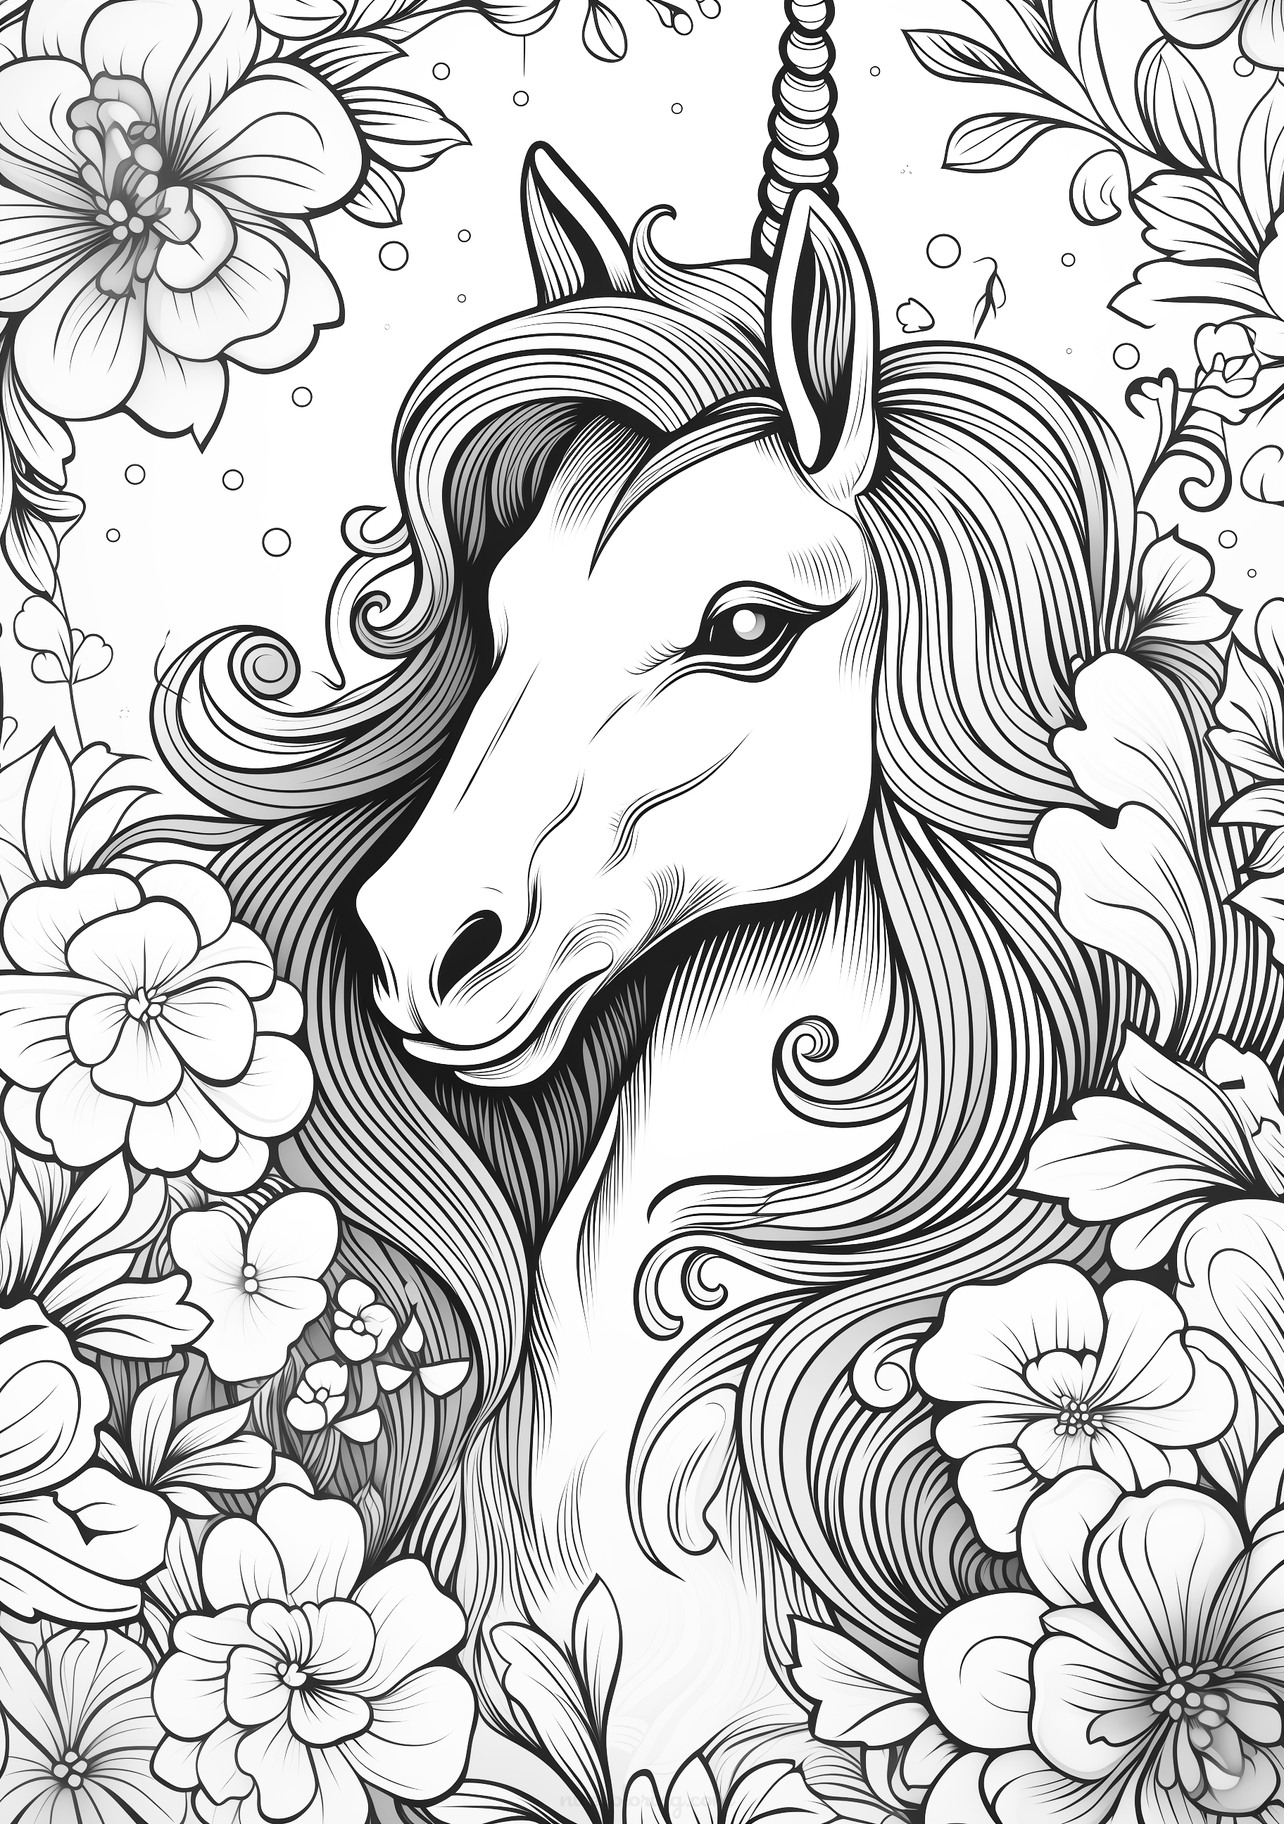 Majestic unicorn surrounded by intricate flowers ready for coloring